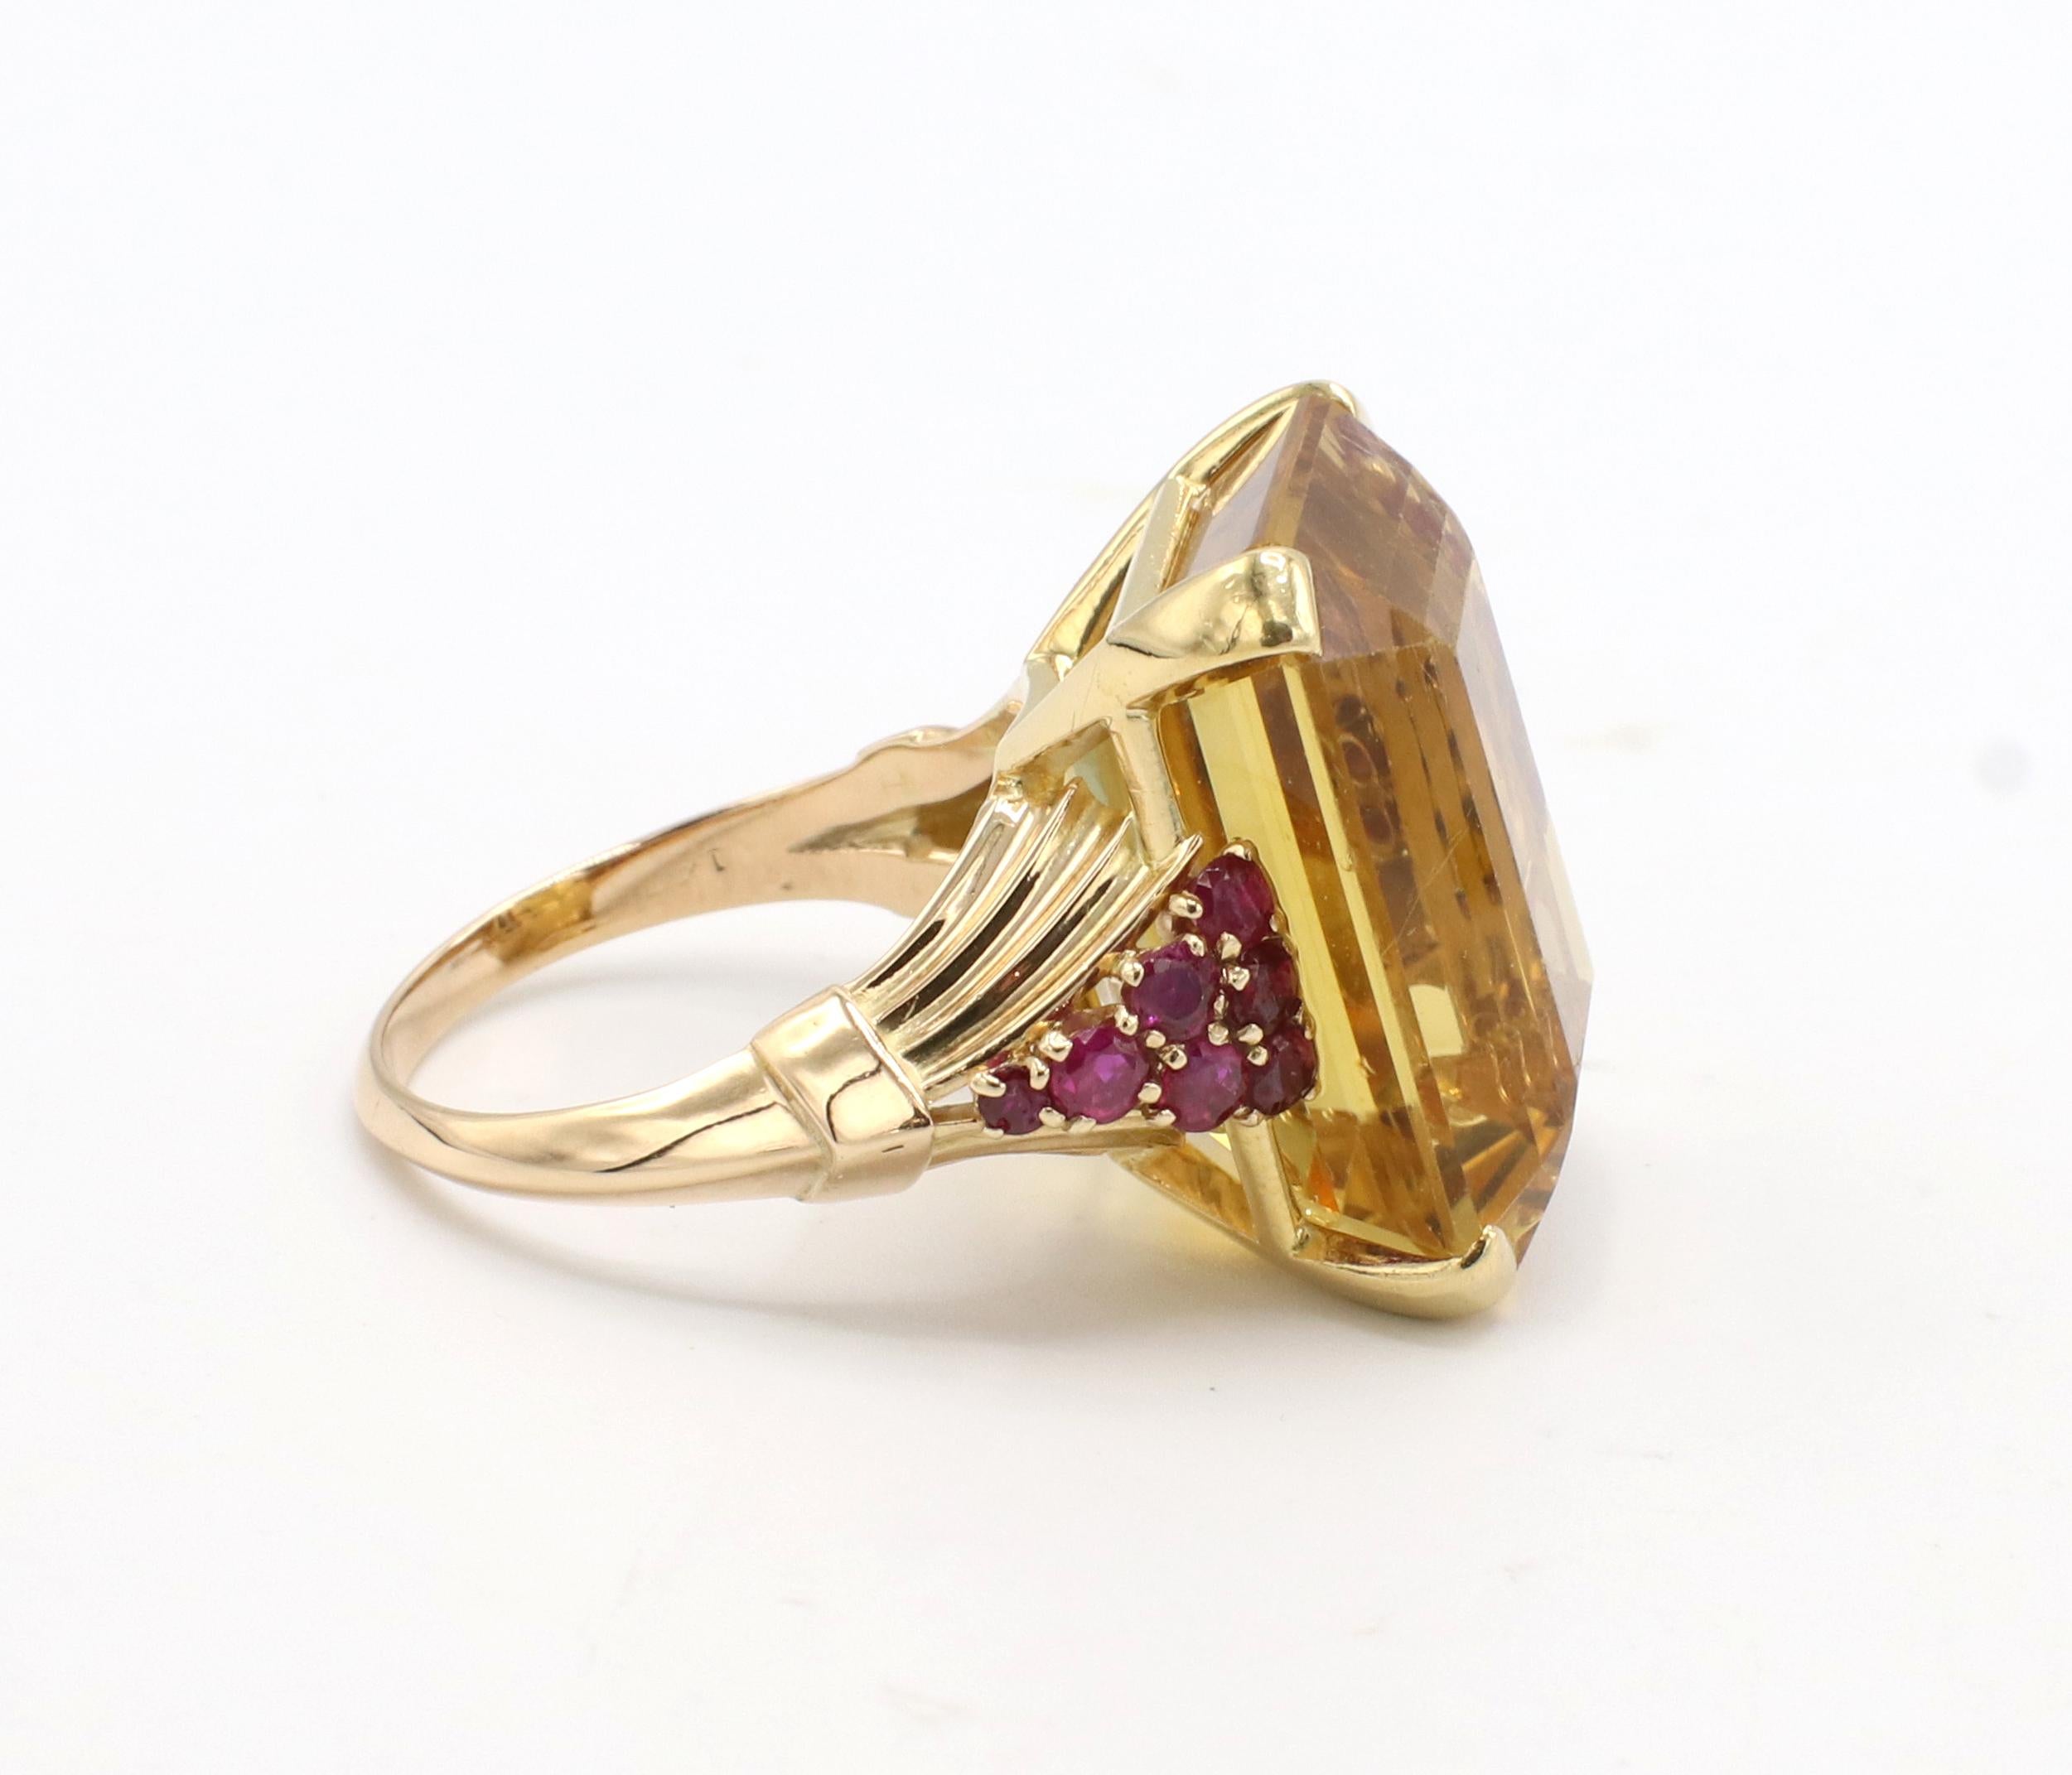 Emerald Cut Retro Citrine & Ruby Yellow Gold Cocktail Ring